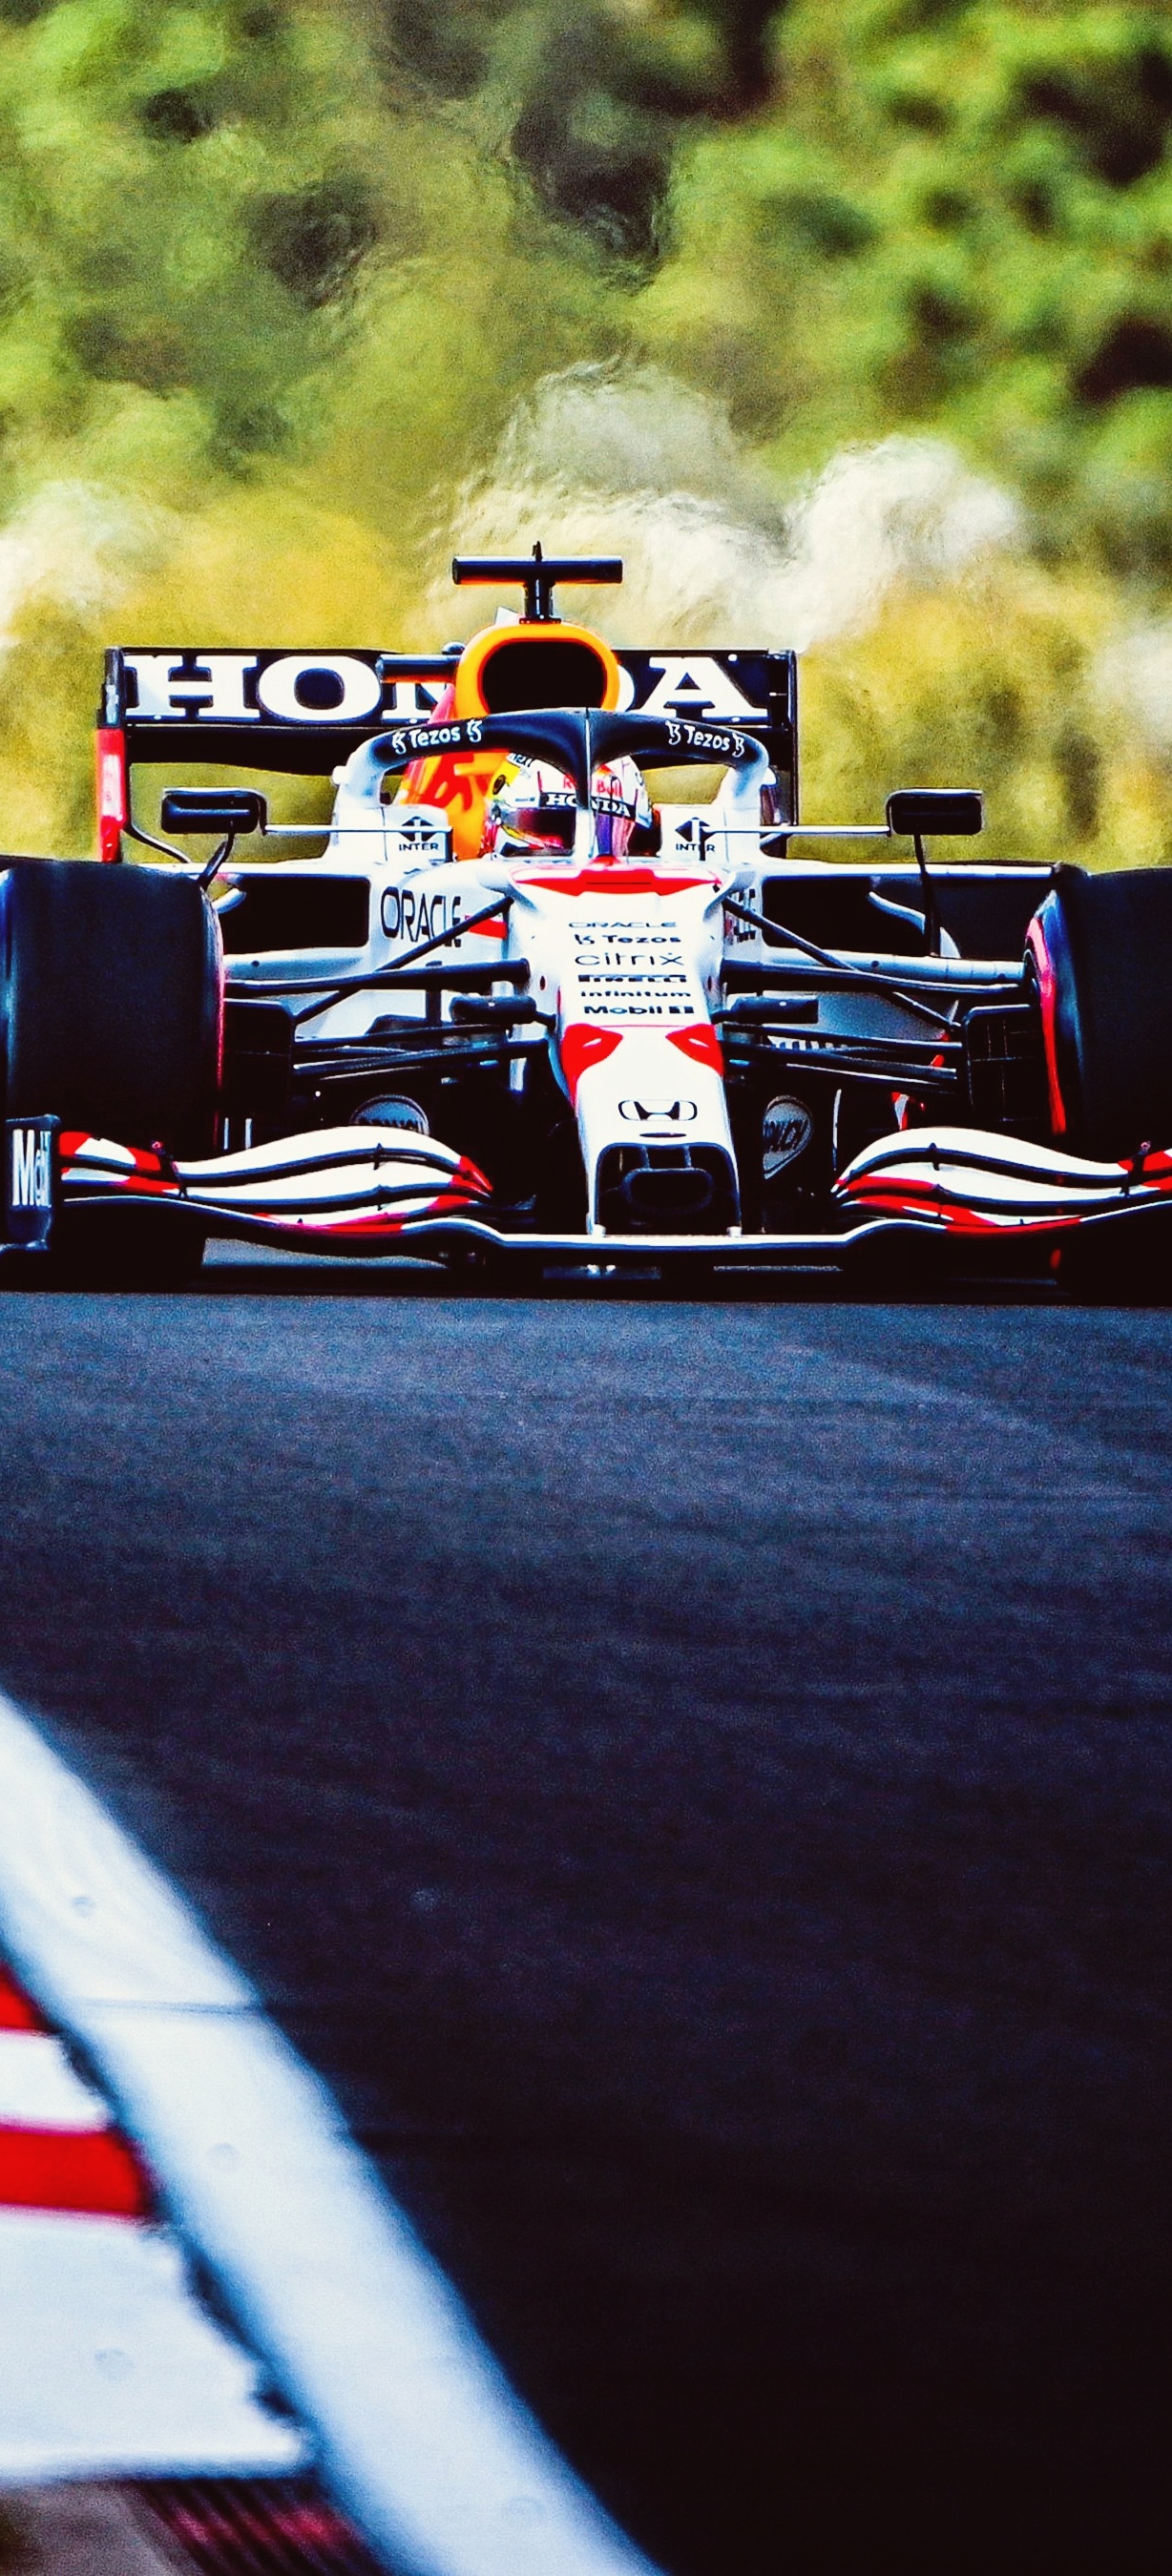 100+] F1 Phone Wallpapers | Wallpapers.com